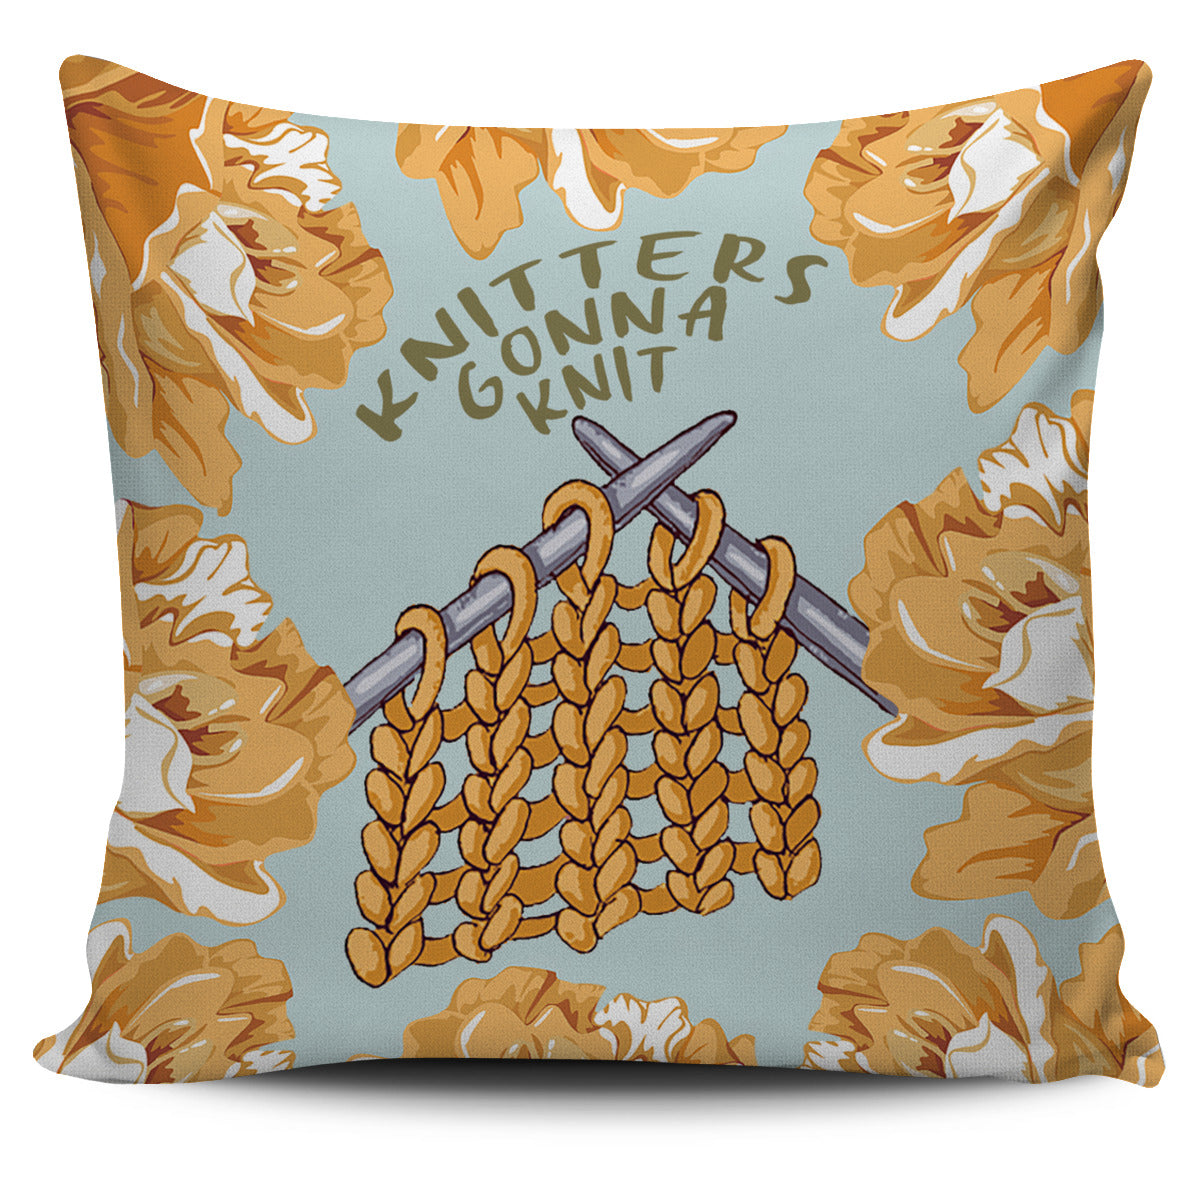 Knitters Gonna Knit Pillow Cover